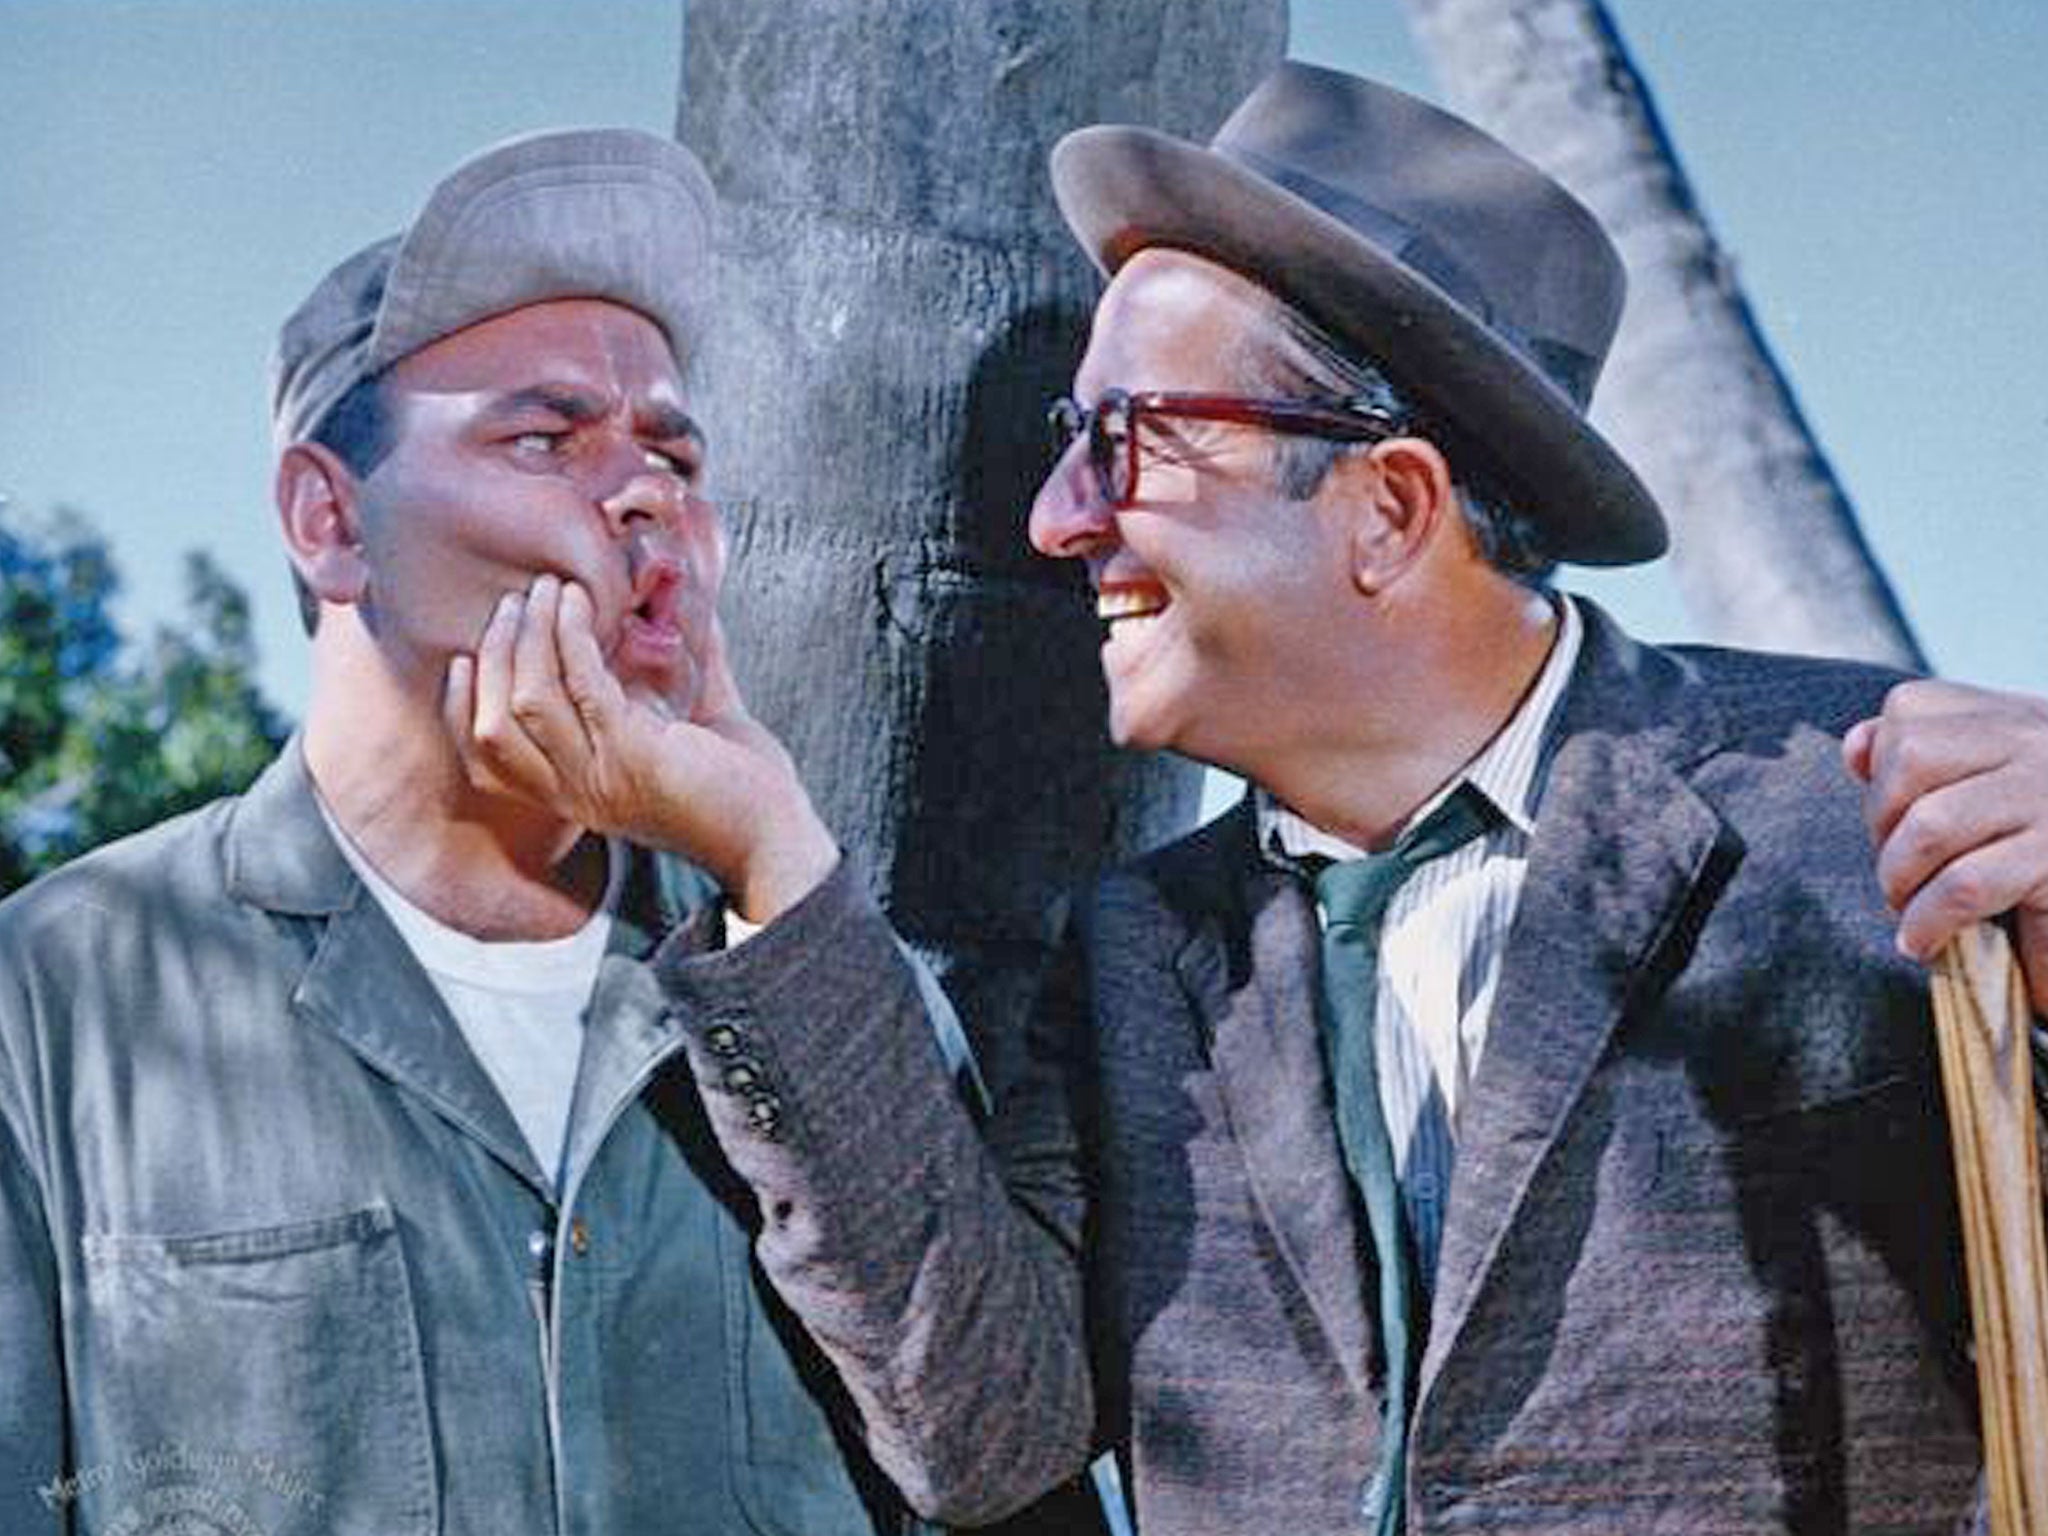 Jonathan Winters and Phil Silvers in the film ‘It’s A Mad, Mad, Mad, Mad World